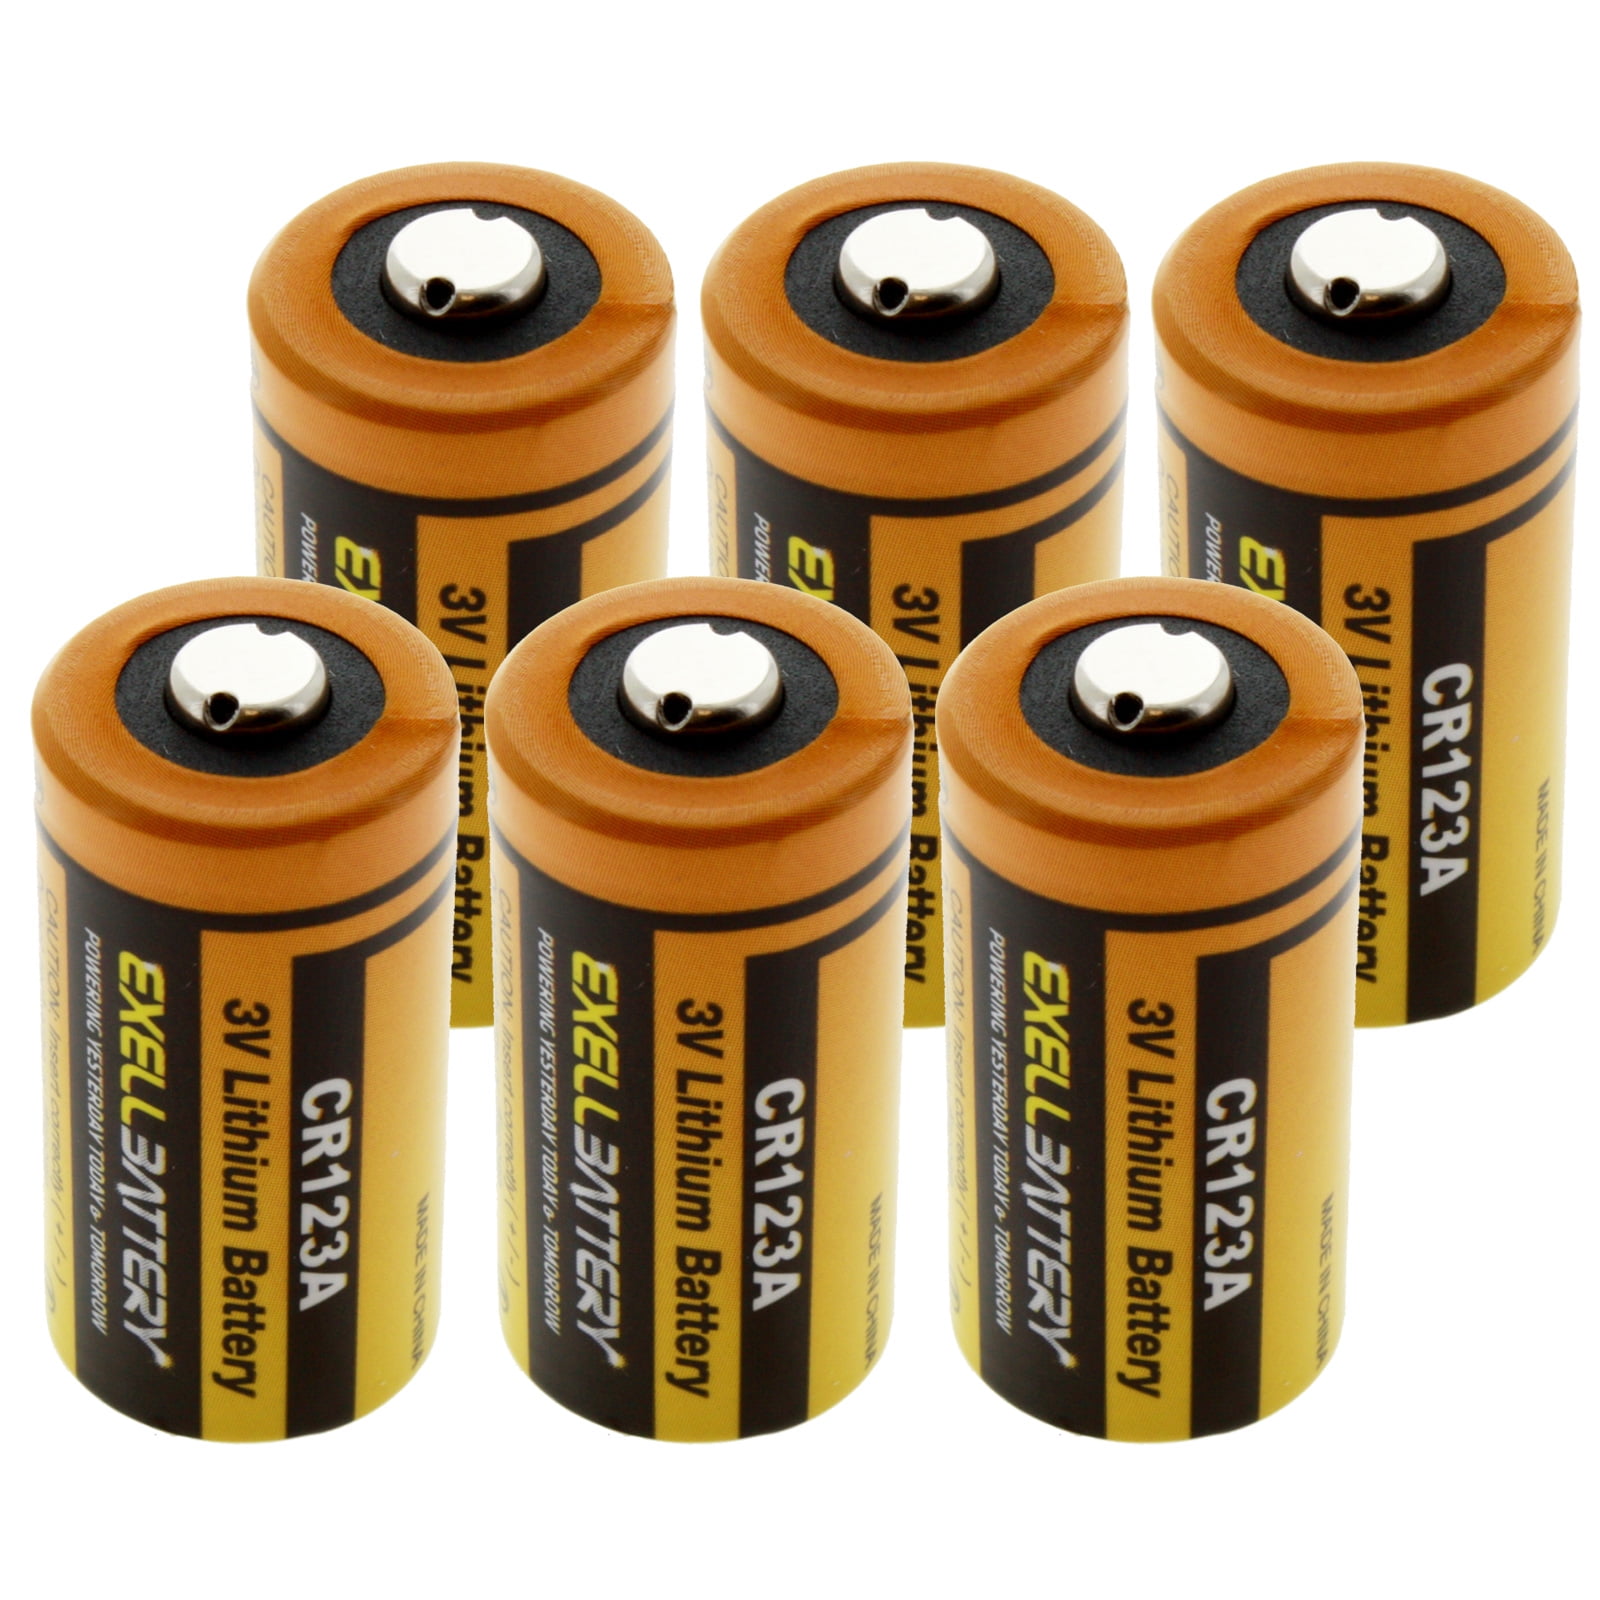 Evergreen CR123A Lithium Batteries - 2/Pack